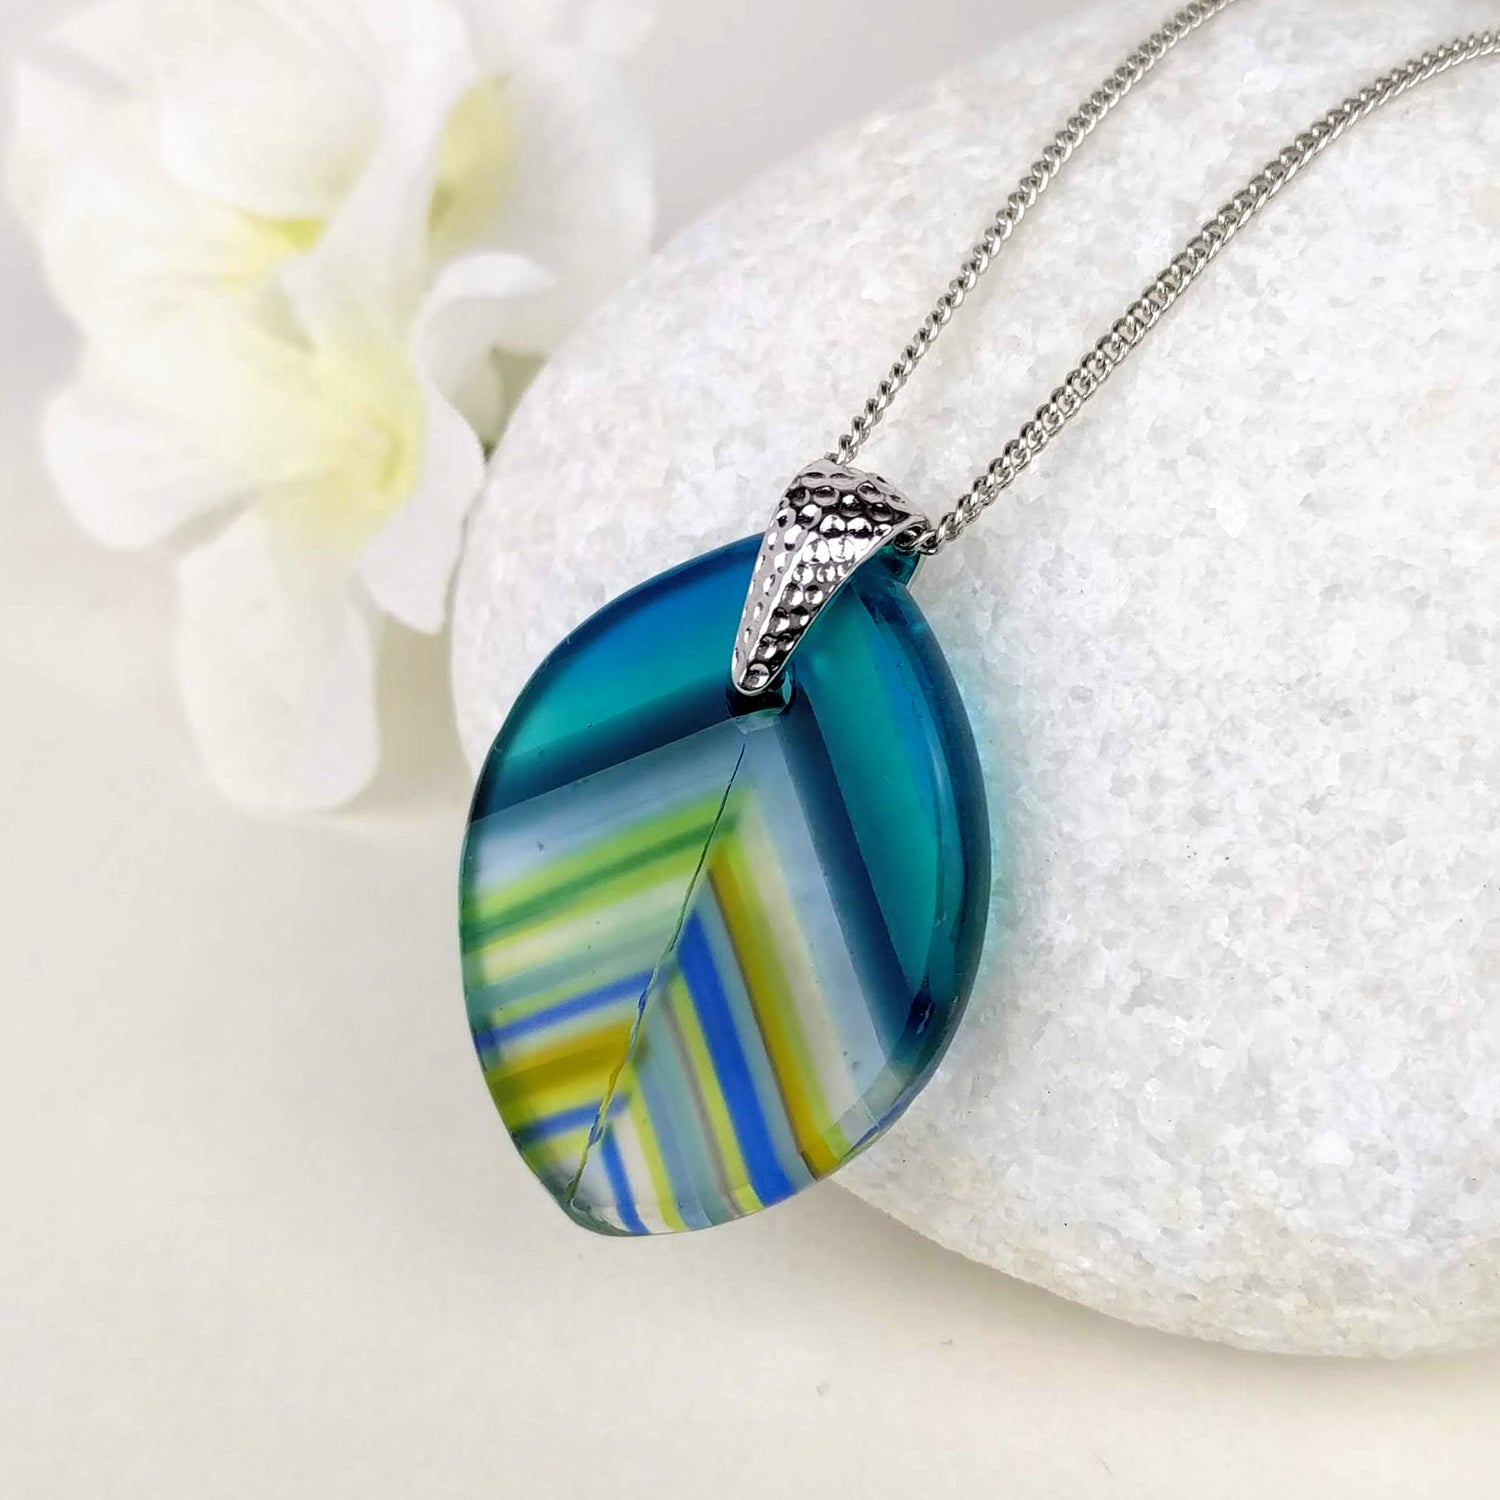 3 Small Square Design Handmade Mosaic Fused Glass Necklace – Intuita Shop